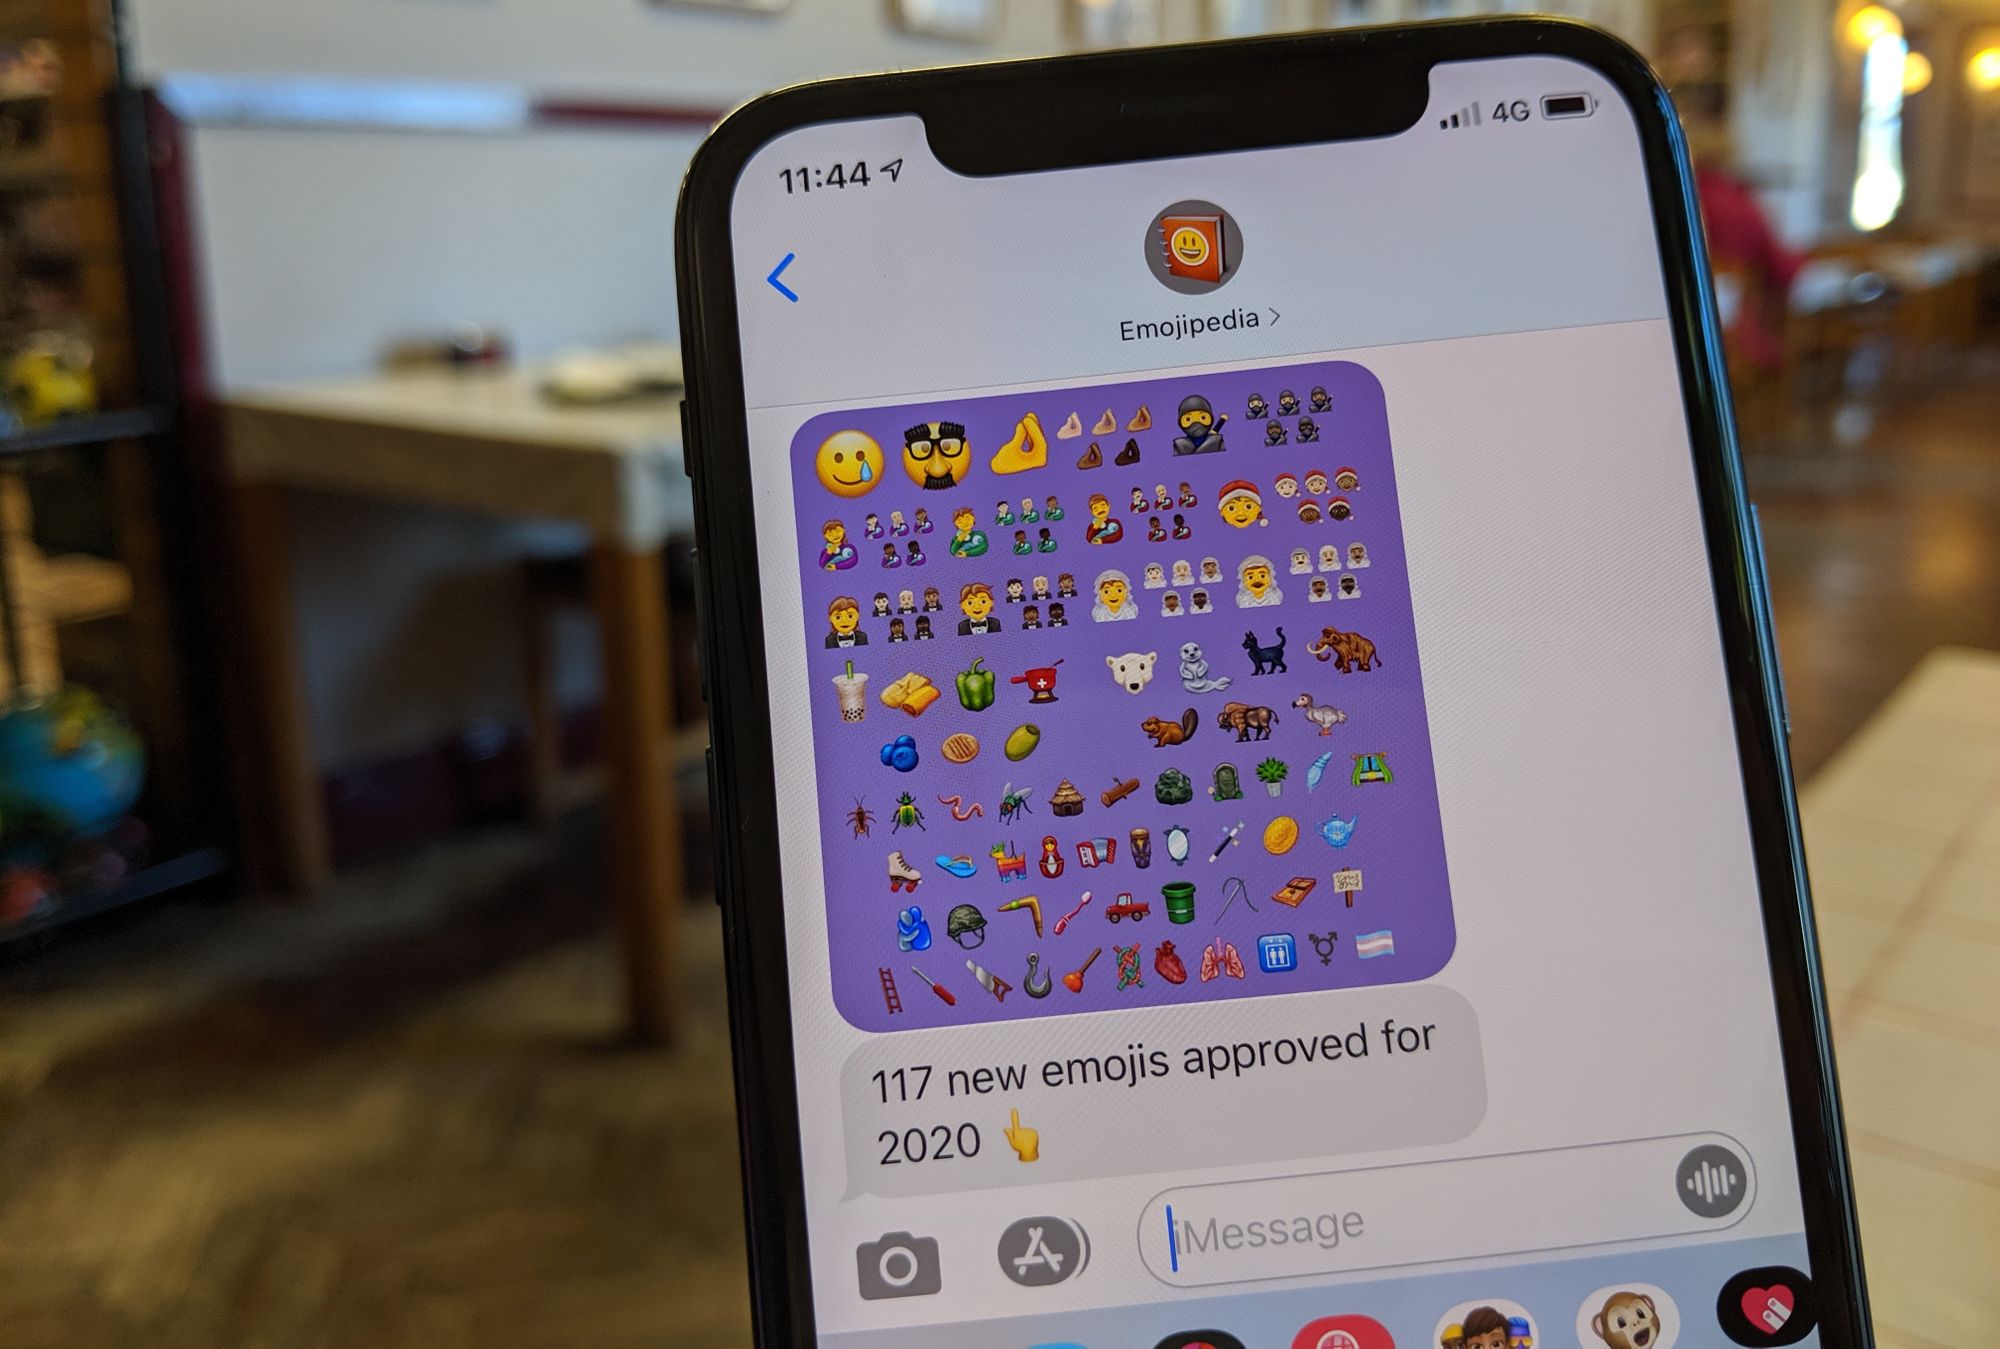 117 New Emojis In Final List For 2020